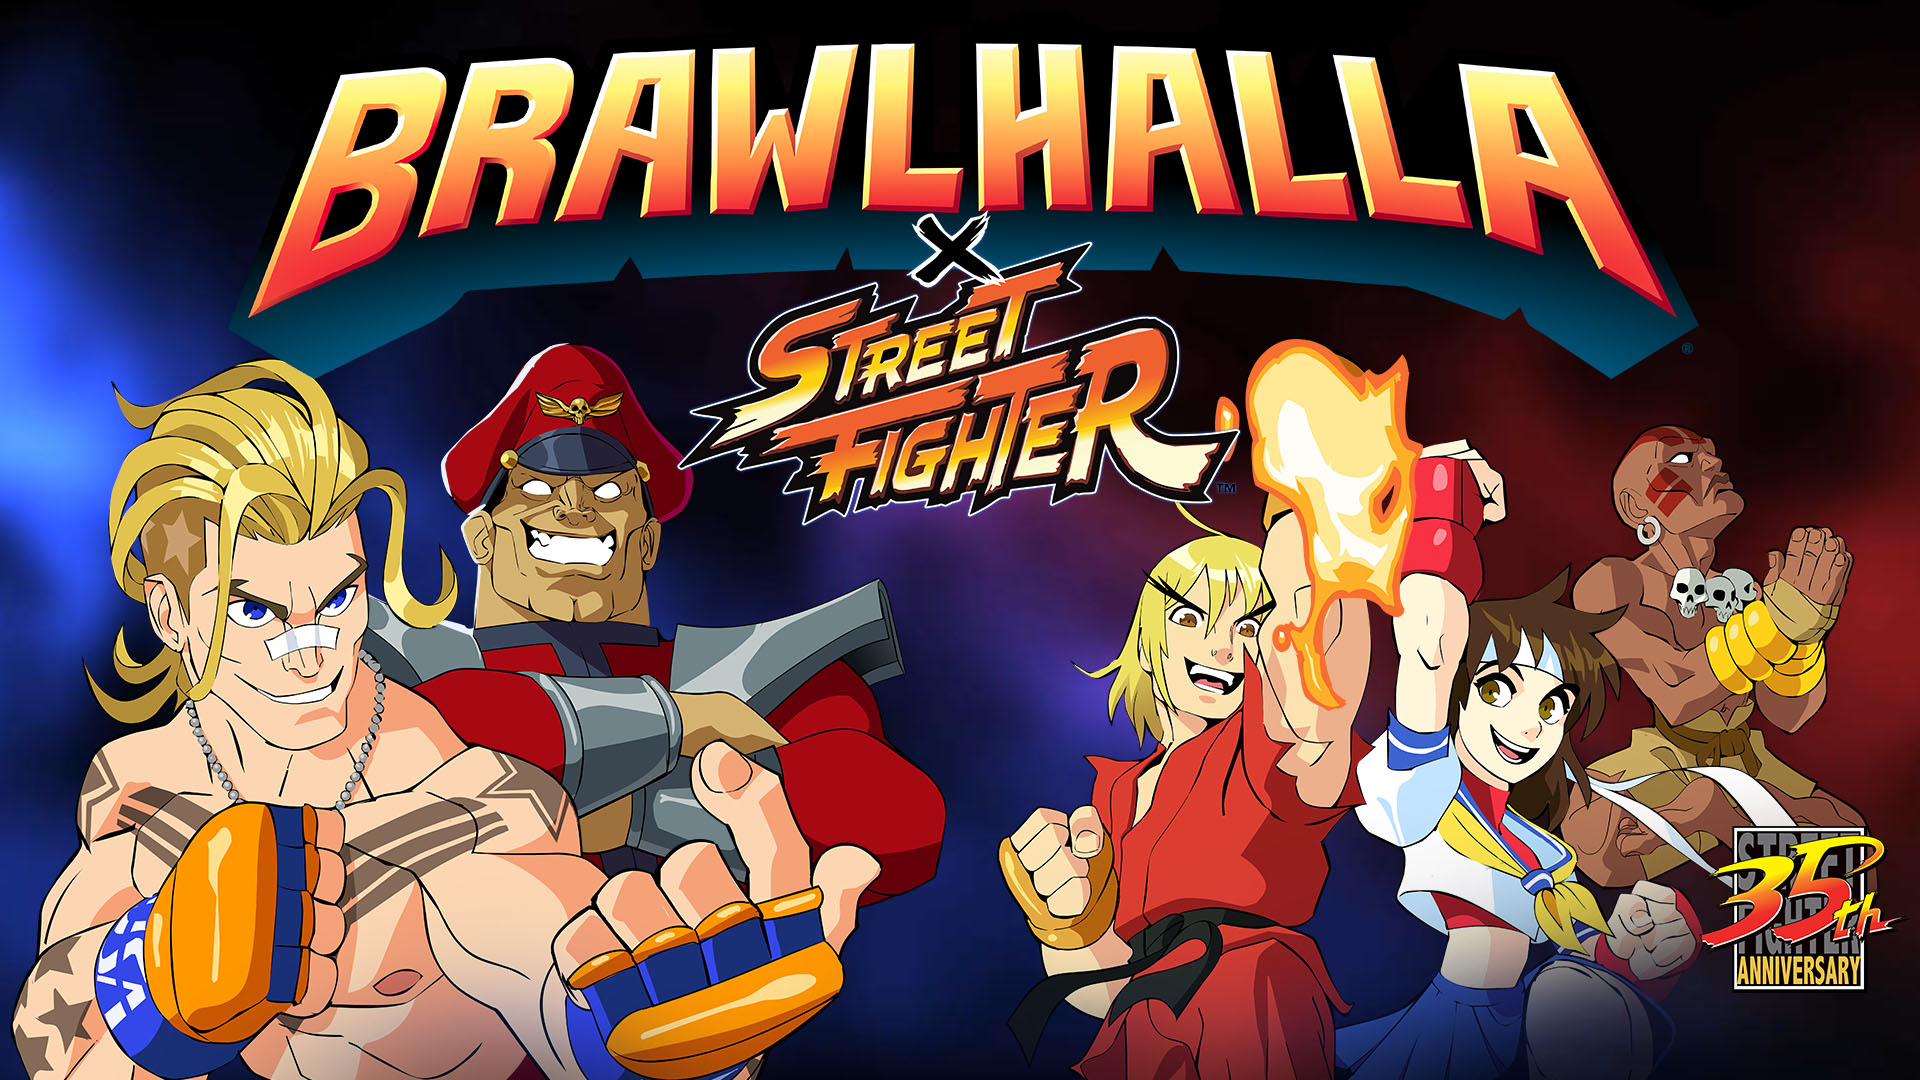 Five New Challengers Appear in Brawlhalla x Street Fighter Part 2! &#8211; Patch 6.07